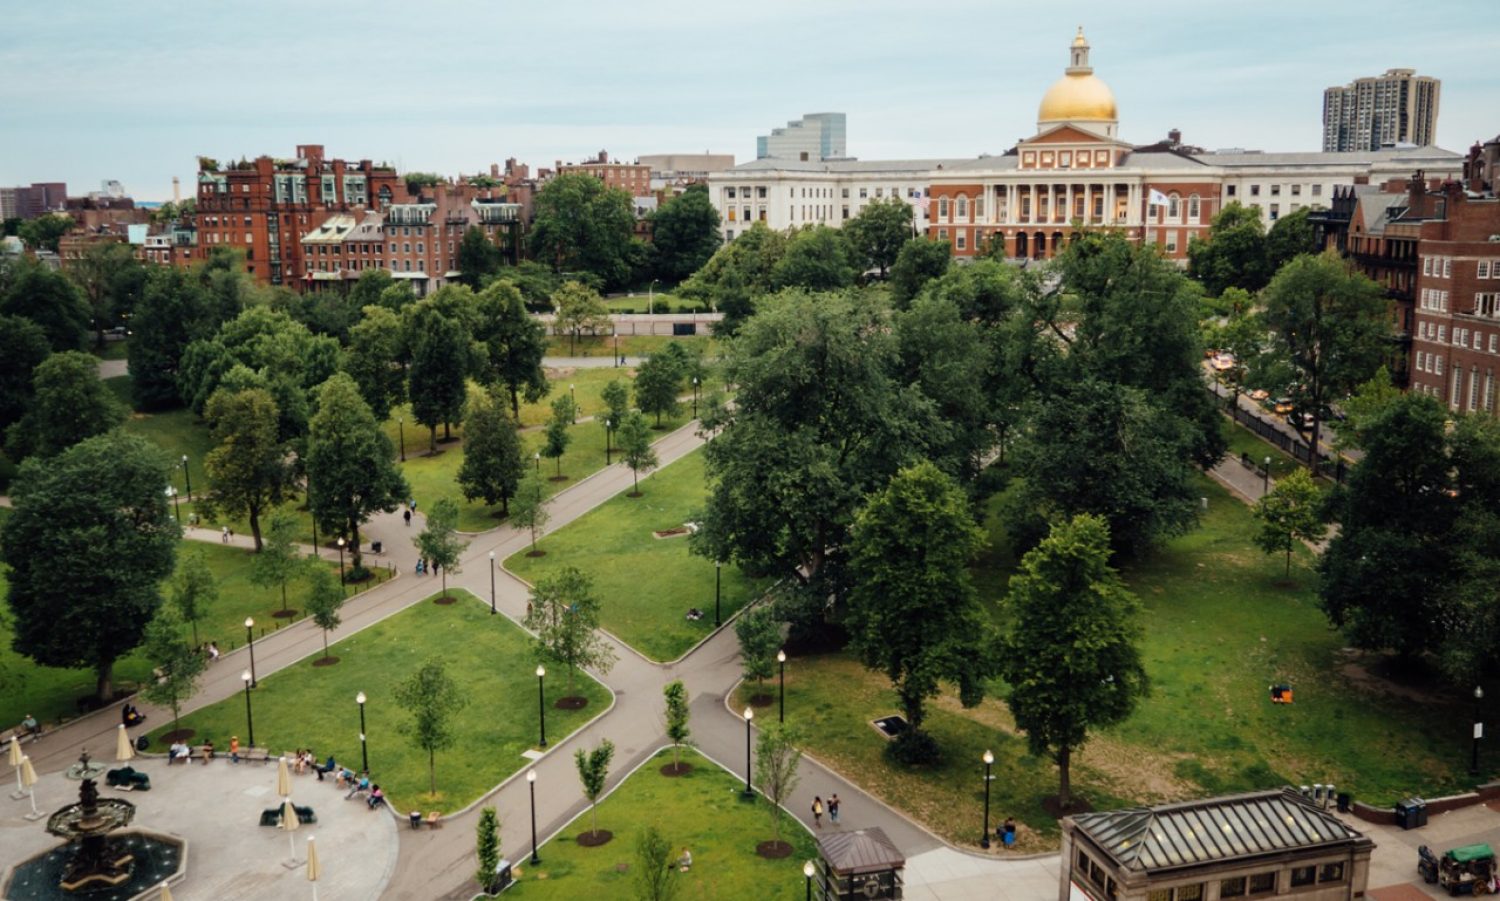 Boston Common and the Massachusetts State House